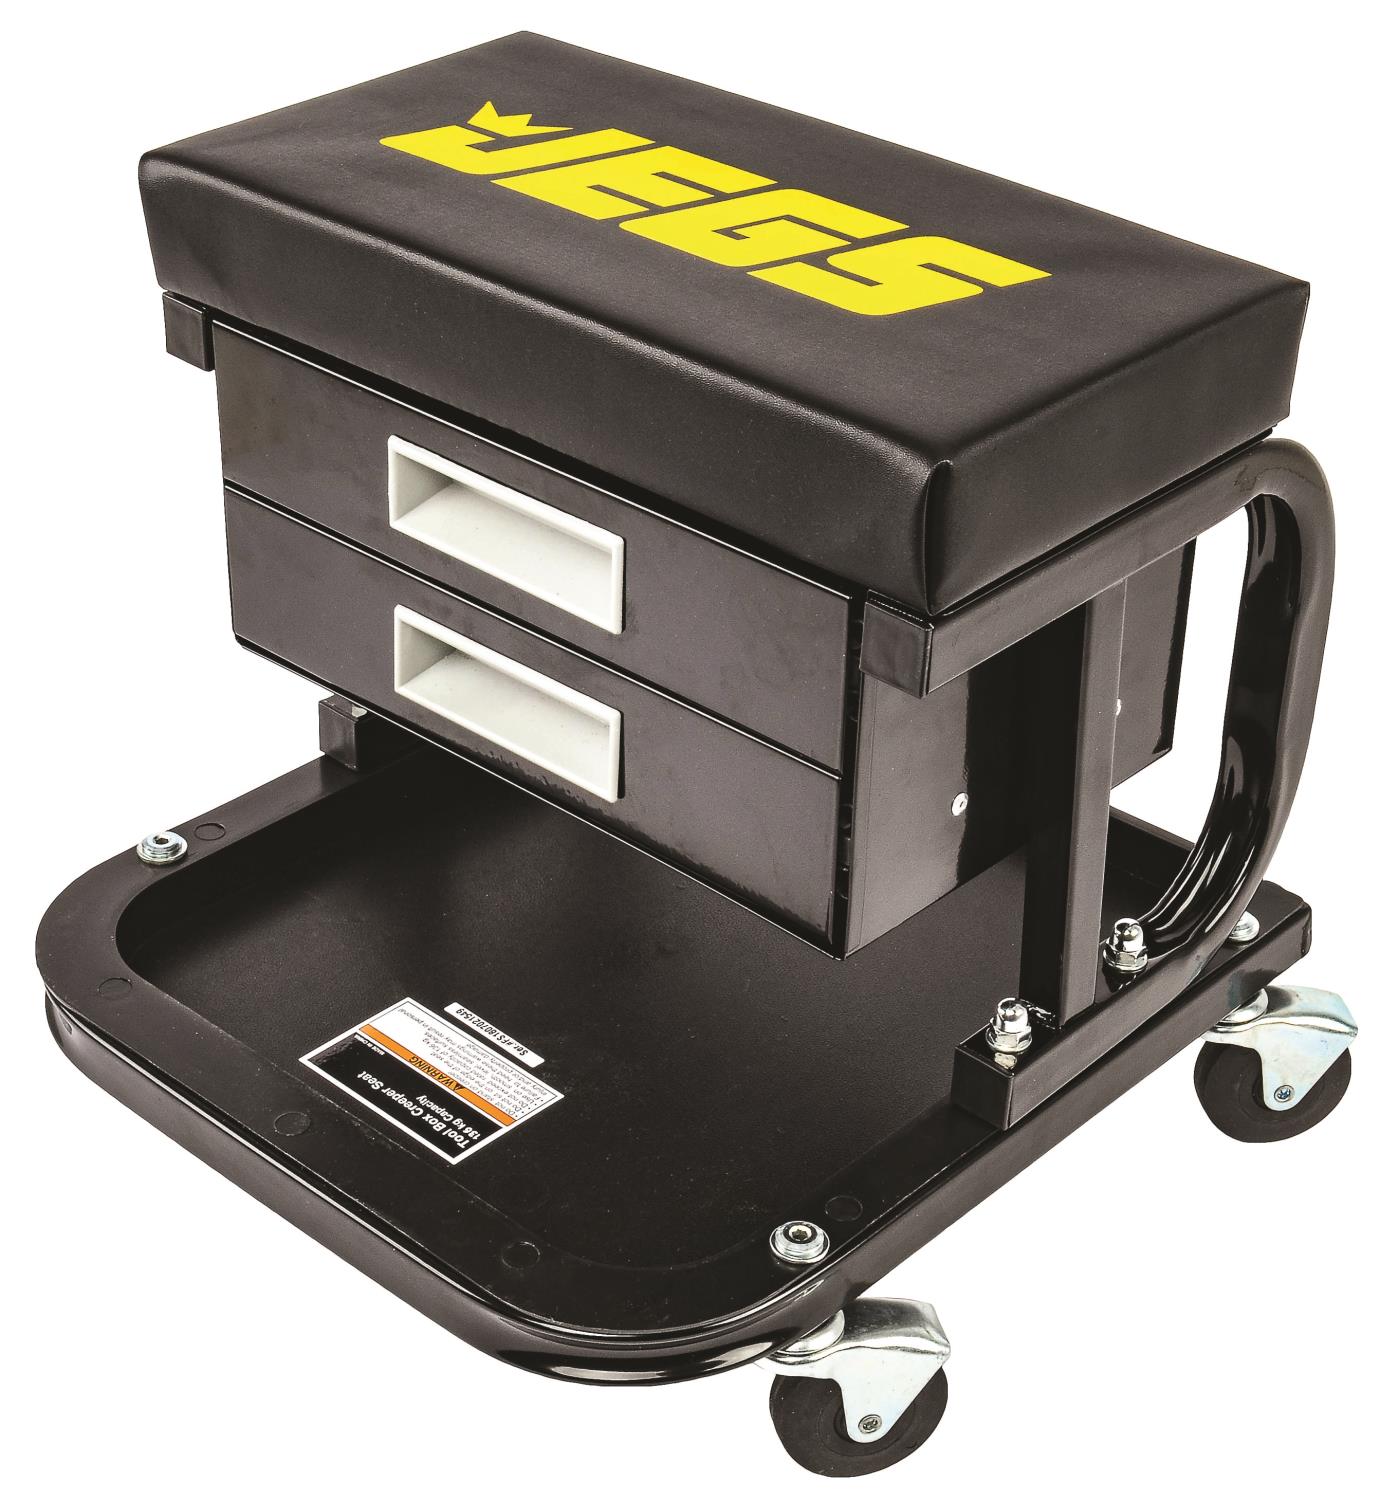 Mechanic Seat with Drawers and Tool Tray [300 lb. Capacity]